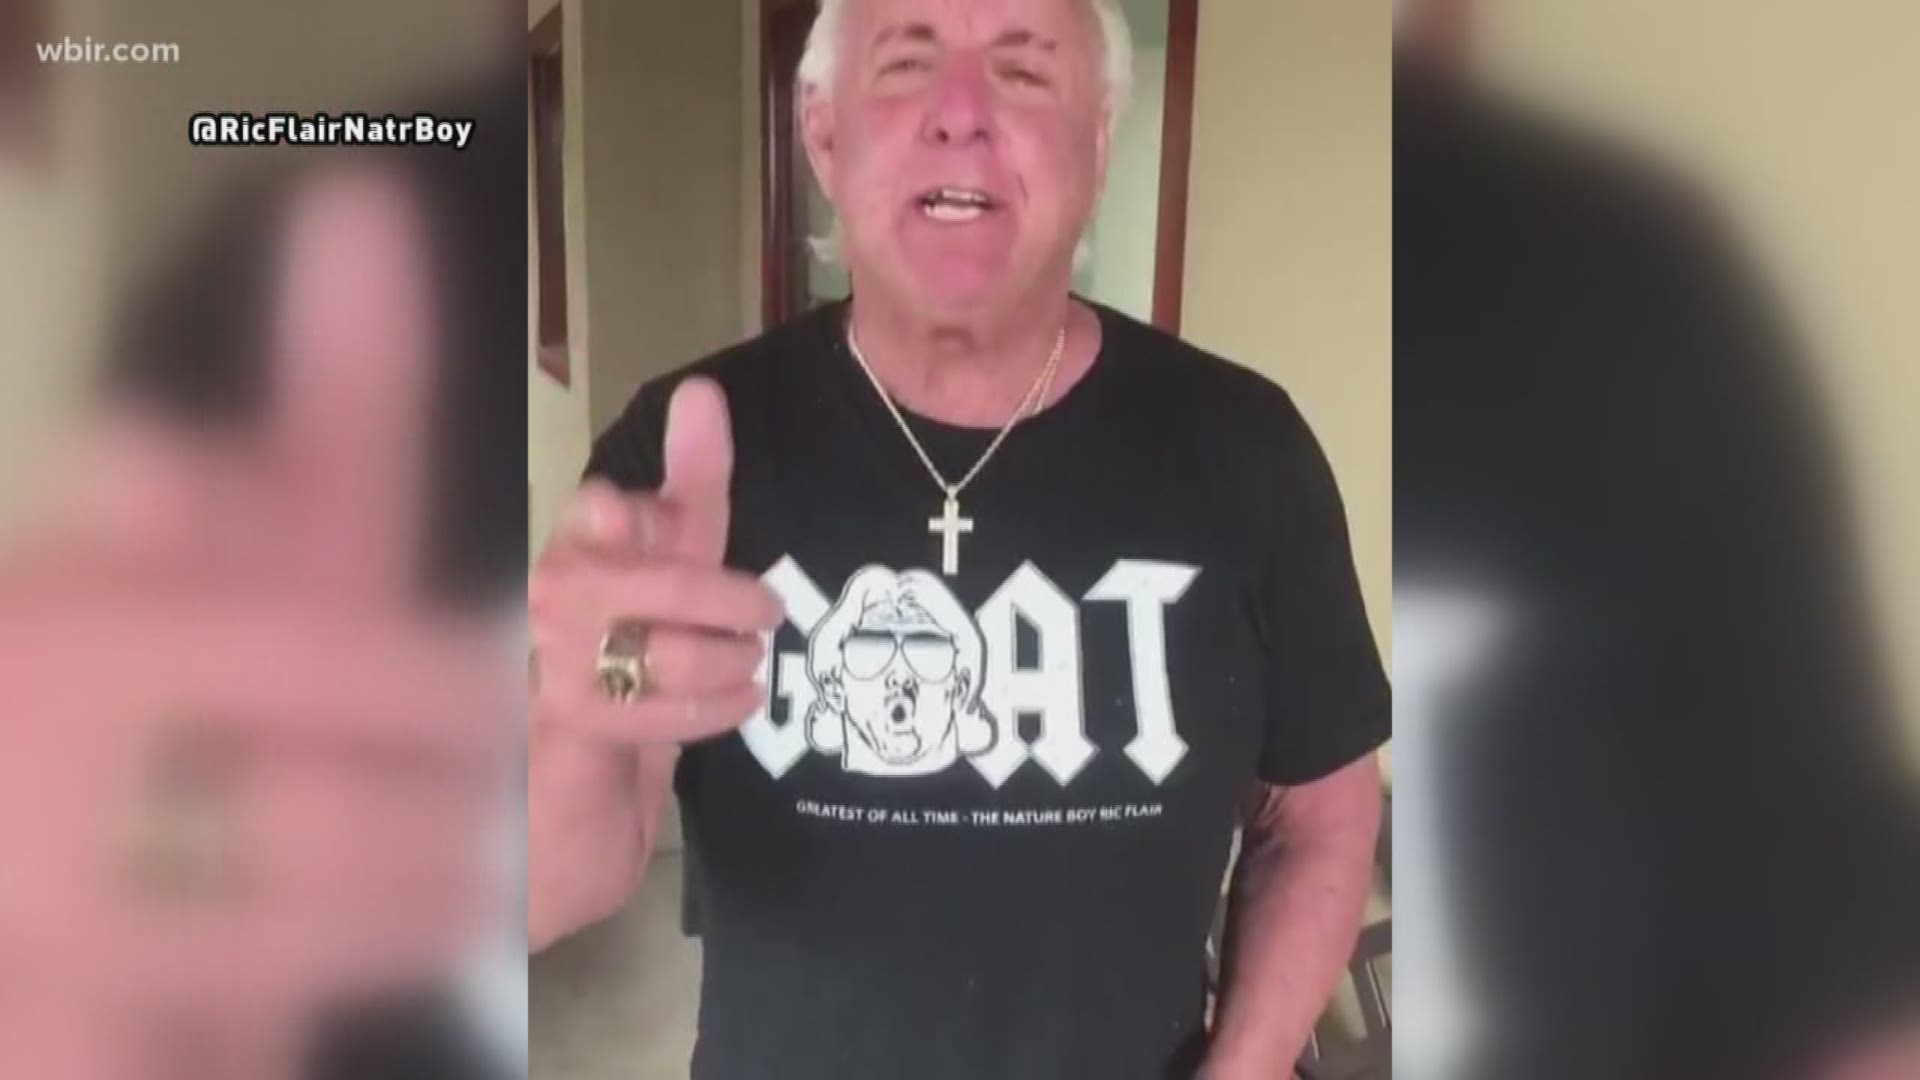 Pro-wrestler Ric Flair is known for his calculating moves and famous quotes in and out of the ring.
Now, the Tennessee native is responding to an honor from the State House of Representatives.